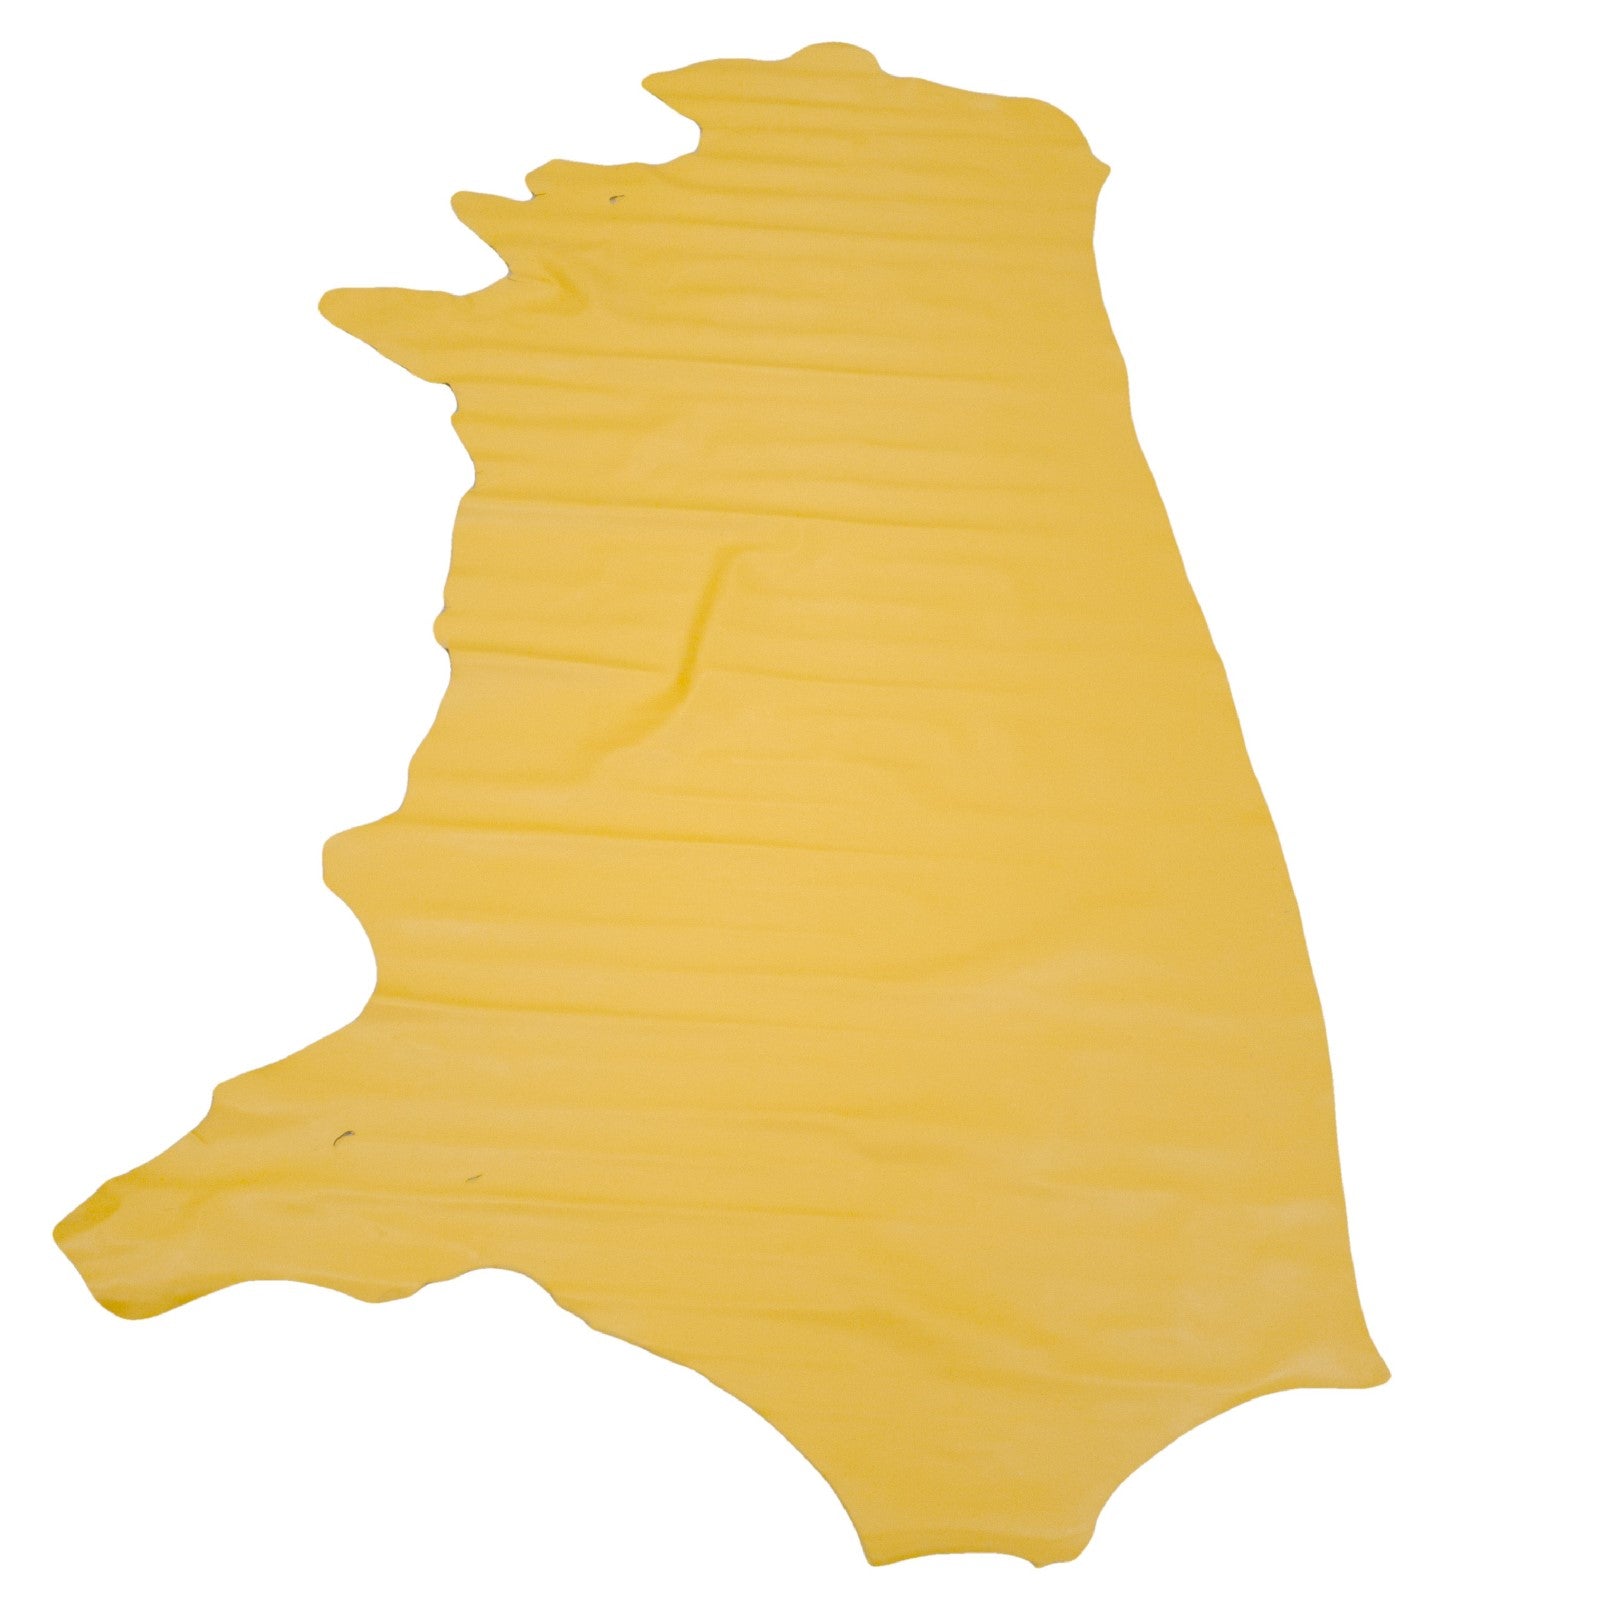 Chiefs KC Yellow, 3-3.5 oz Cow Hides, Starting Lineup, Side / 18-20 Sq Ft | The Leather Guy